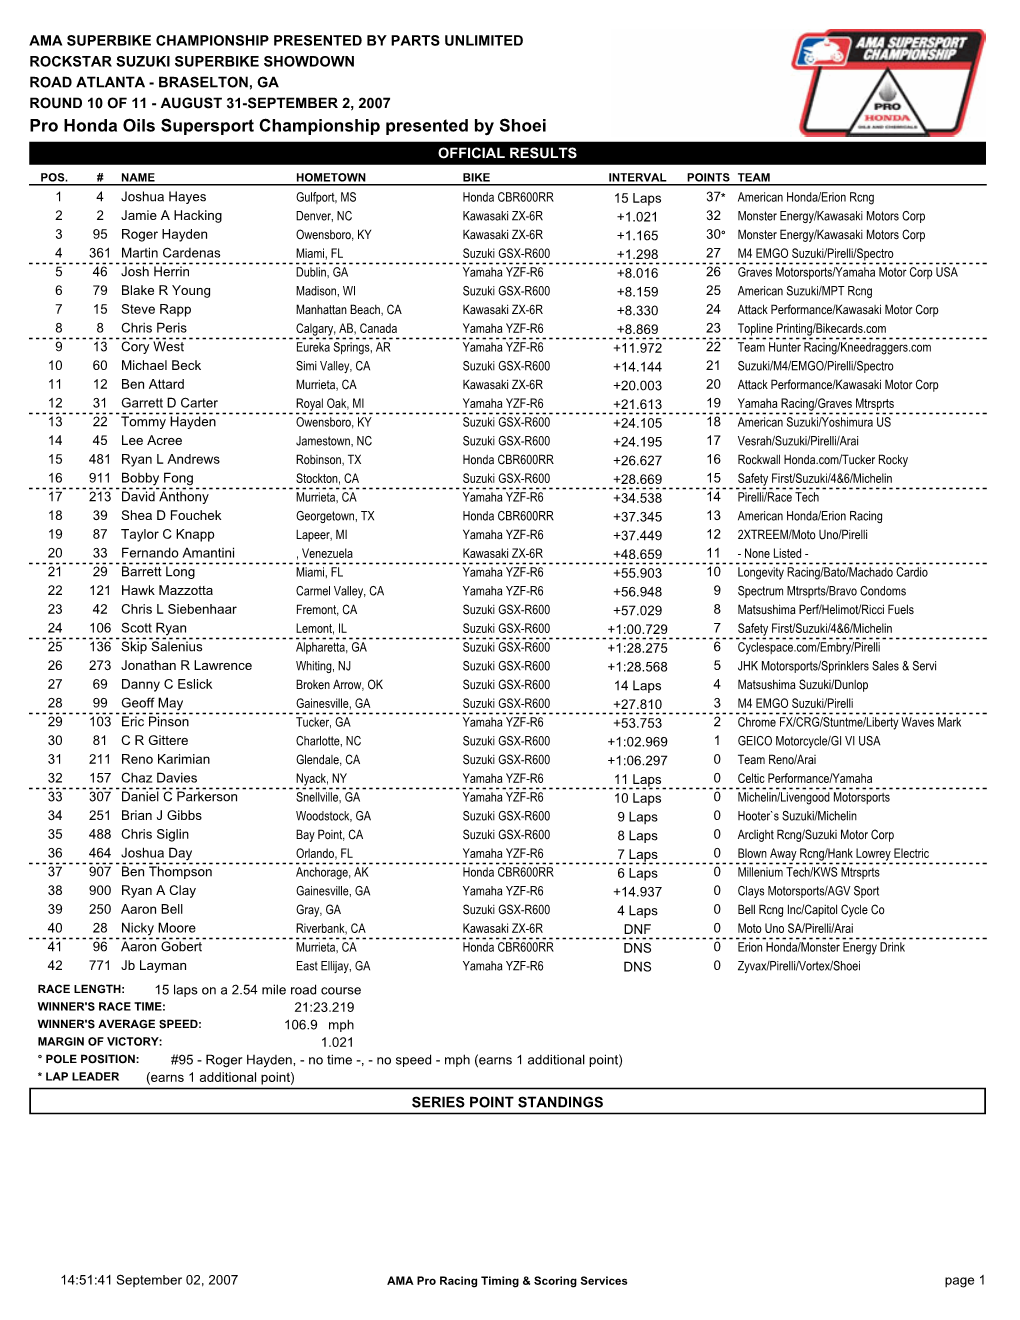 Pro Honda Oils Supersport Championship Presented by Shoei OFFICIAL RESULTS POS